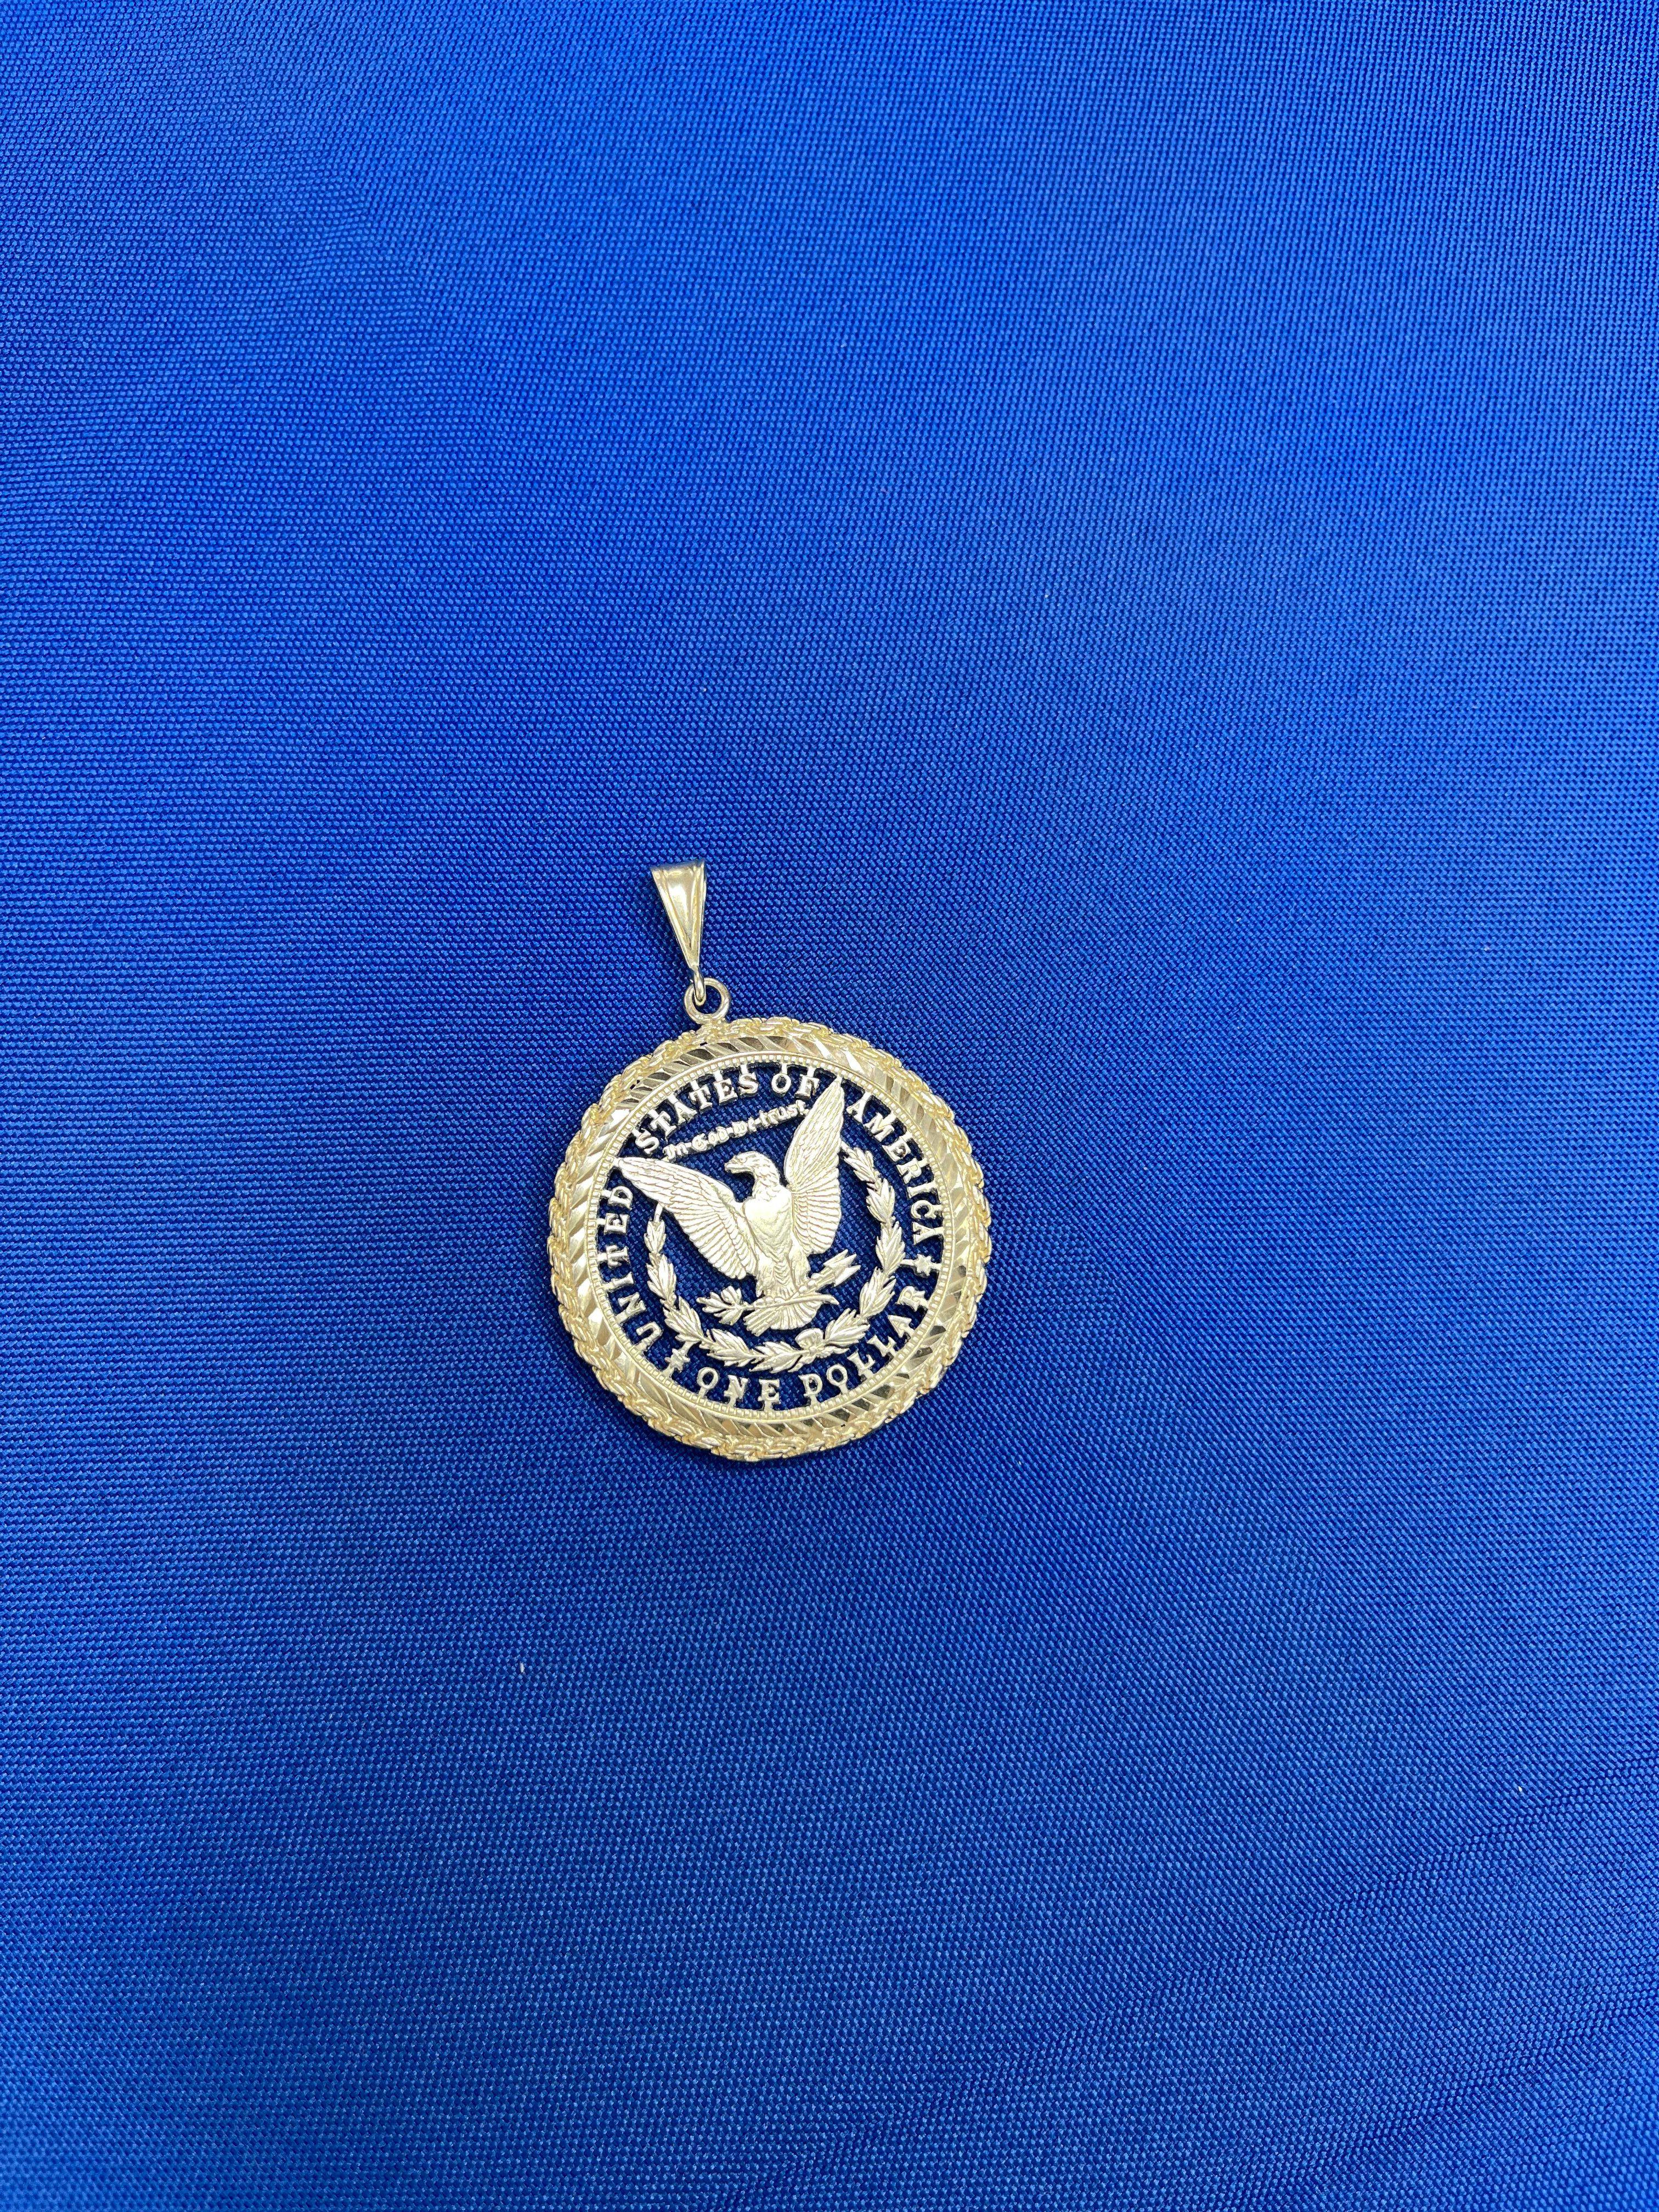 Retro Vintage Dollar Coin White Rhodium Plated Sterling Silver Charm Medallion Pendant For Sale